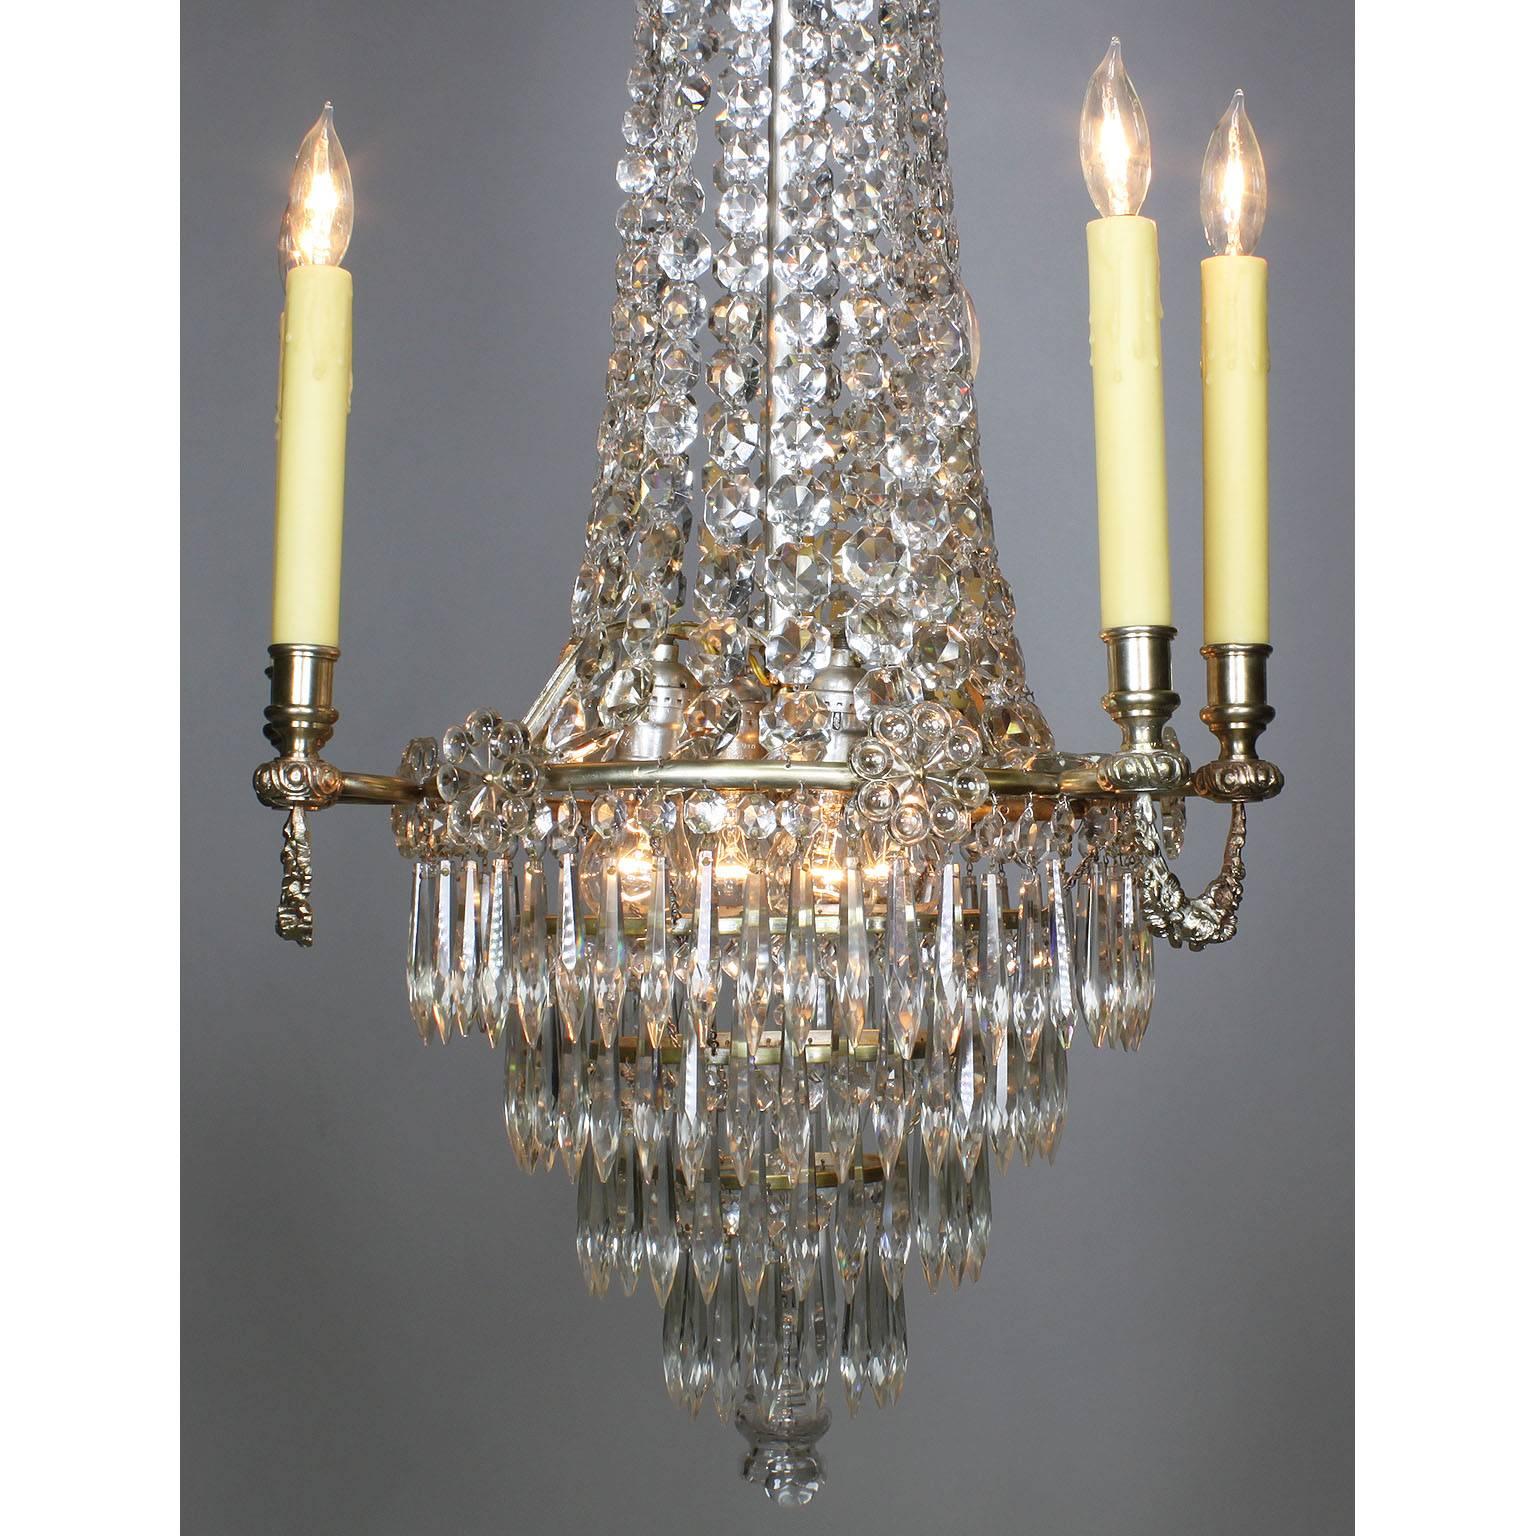 French 19th-20th Century Louis XVI Style Silvered Bronze & Cut-Glass Chandelier In Good Condition For Sale In Los Angeles, CA